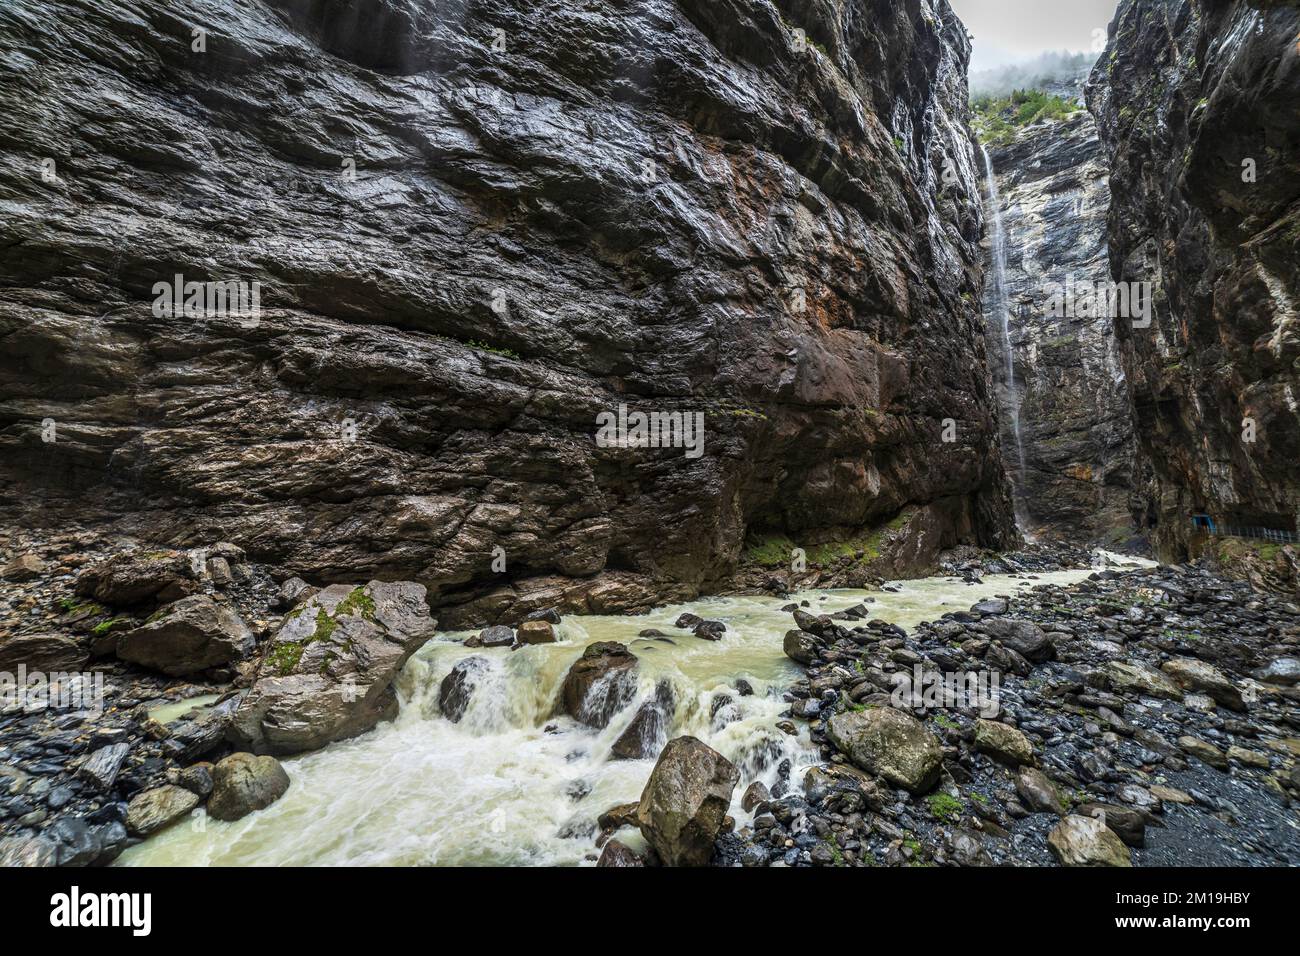 Grindelwald Grindelwald Gorge canyon fiume nell'Oberland Bernese, Svizzera Foto Stock